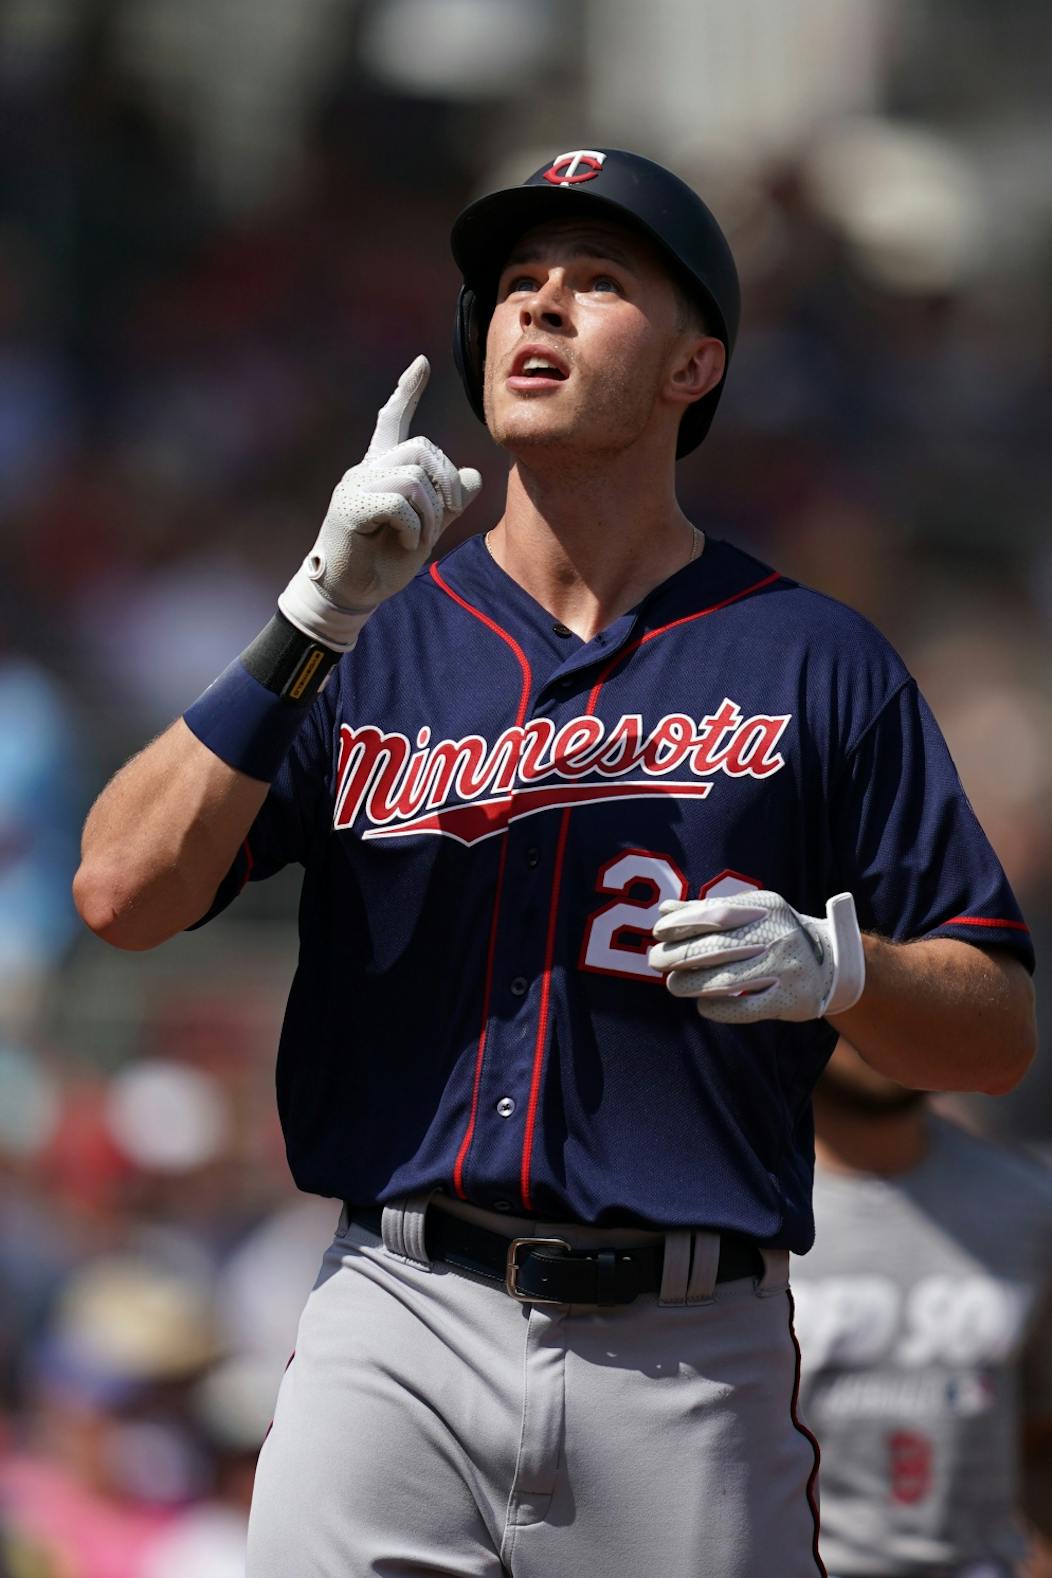 Twins day at camp: Max Kepler homers twice as leadoff hitter